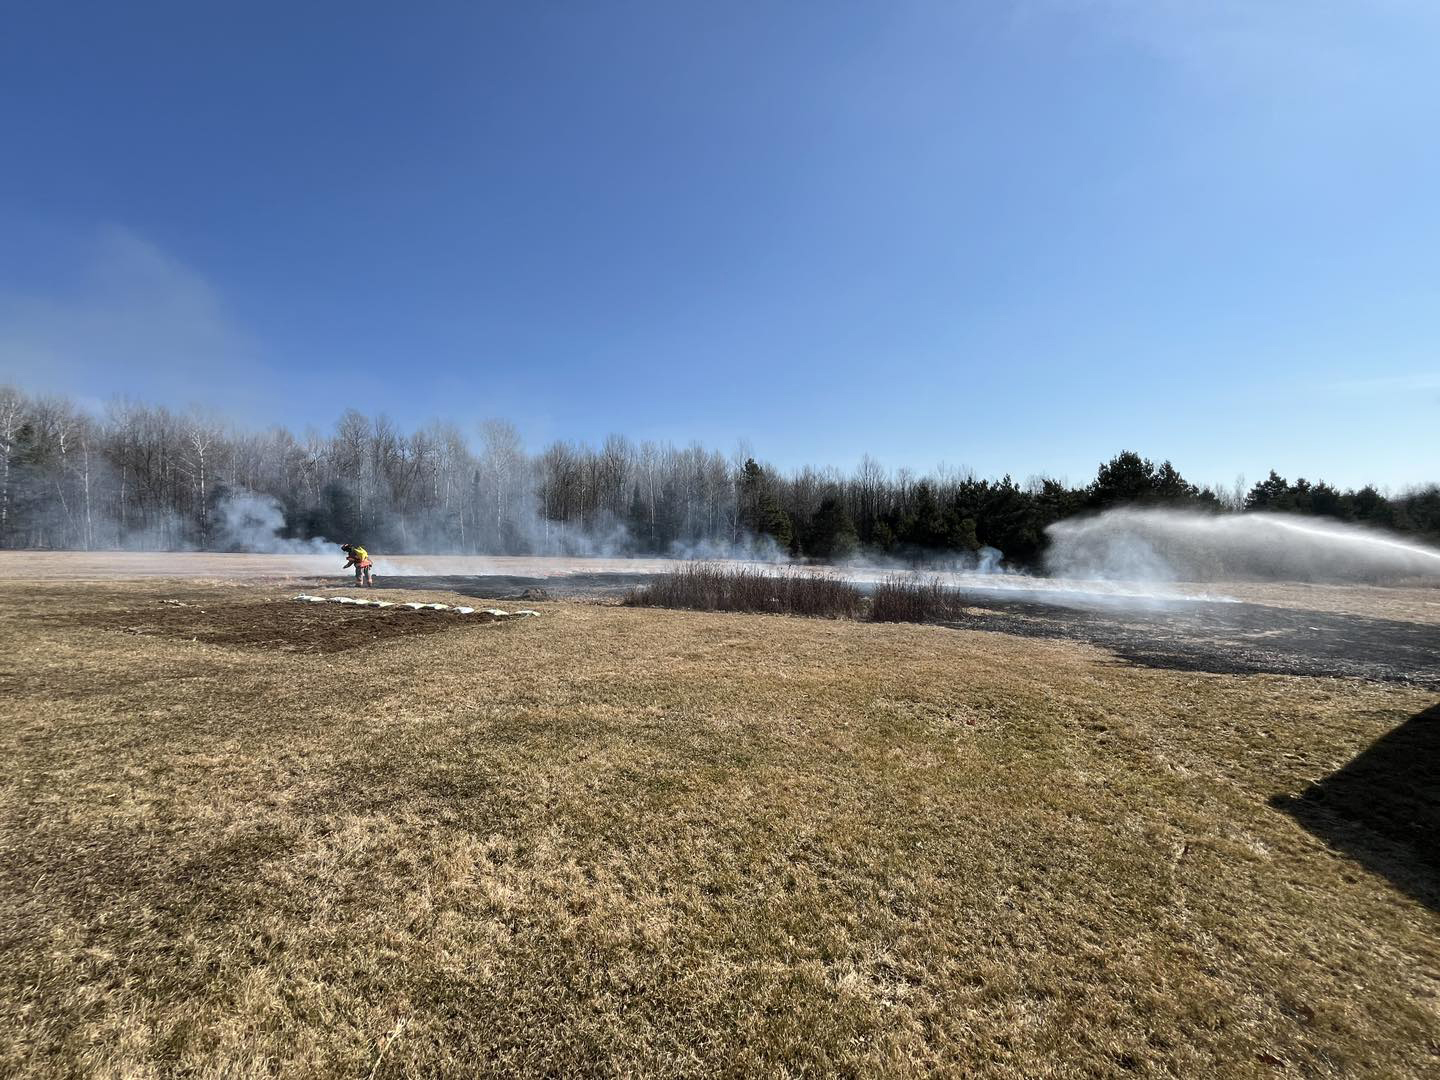 Grass fire northest of Merrill is a reminder of dry conditions and fire danger